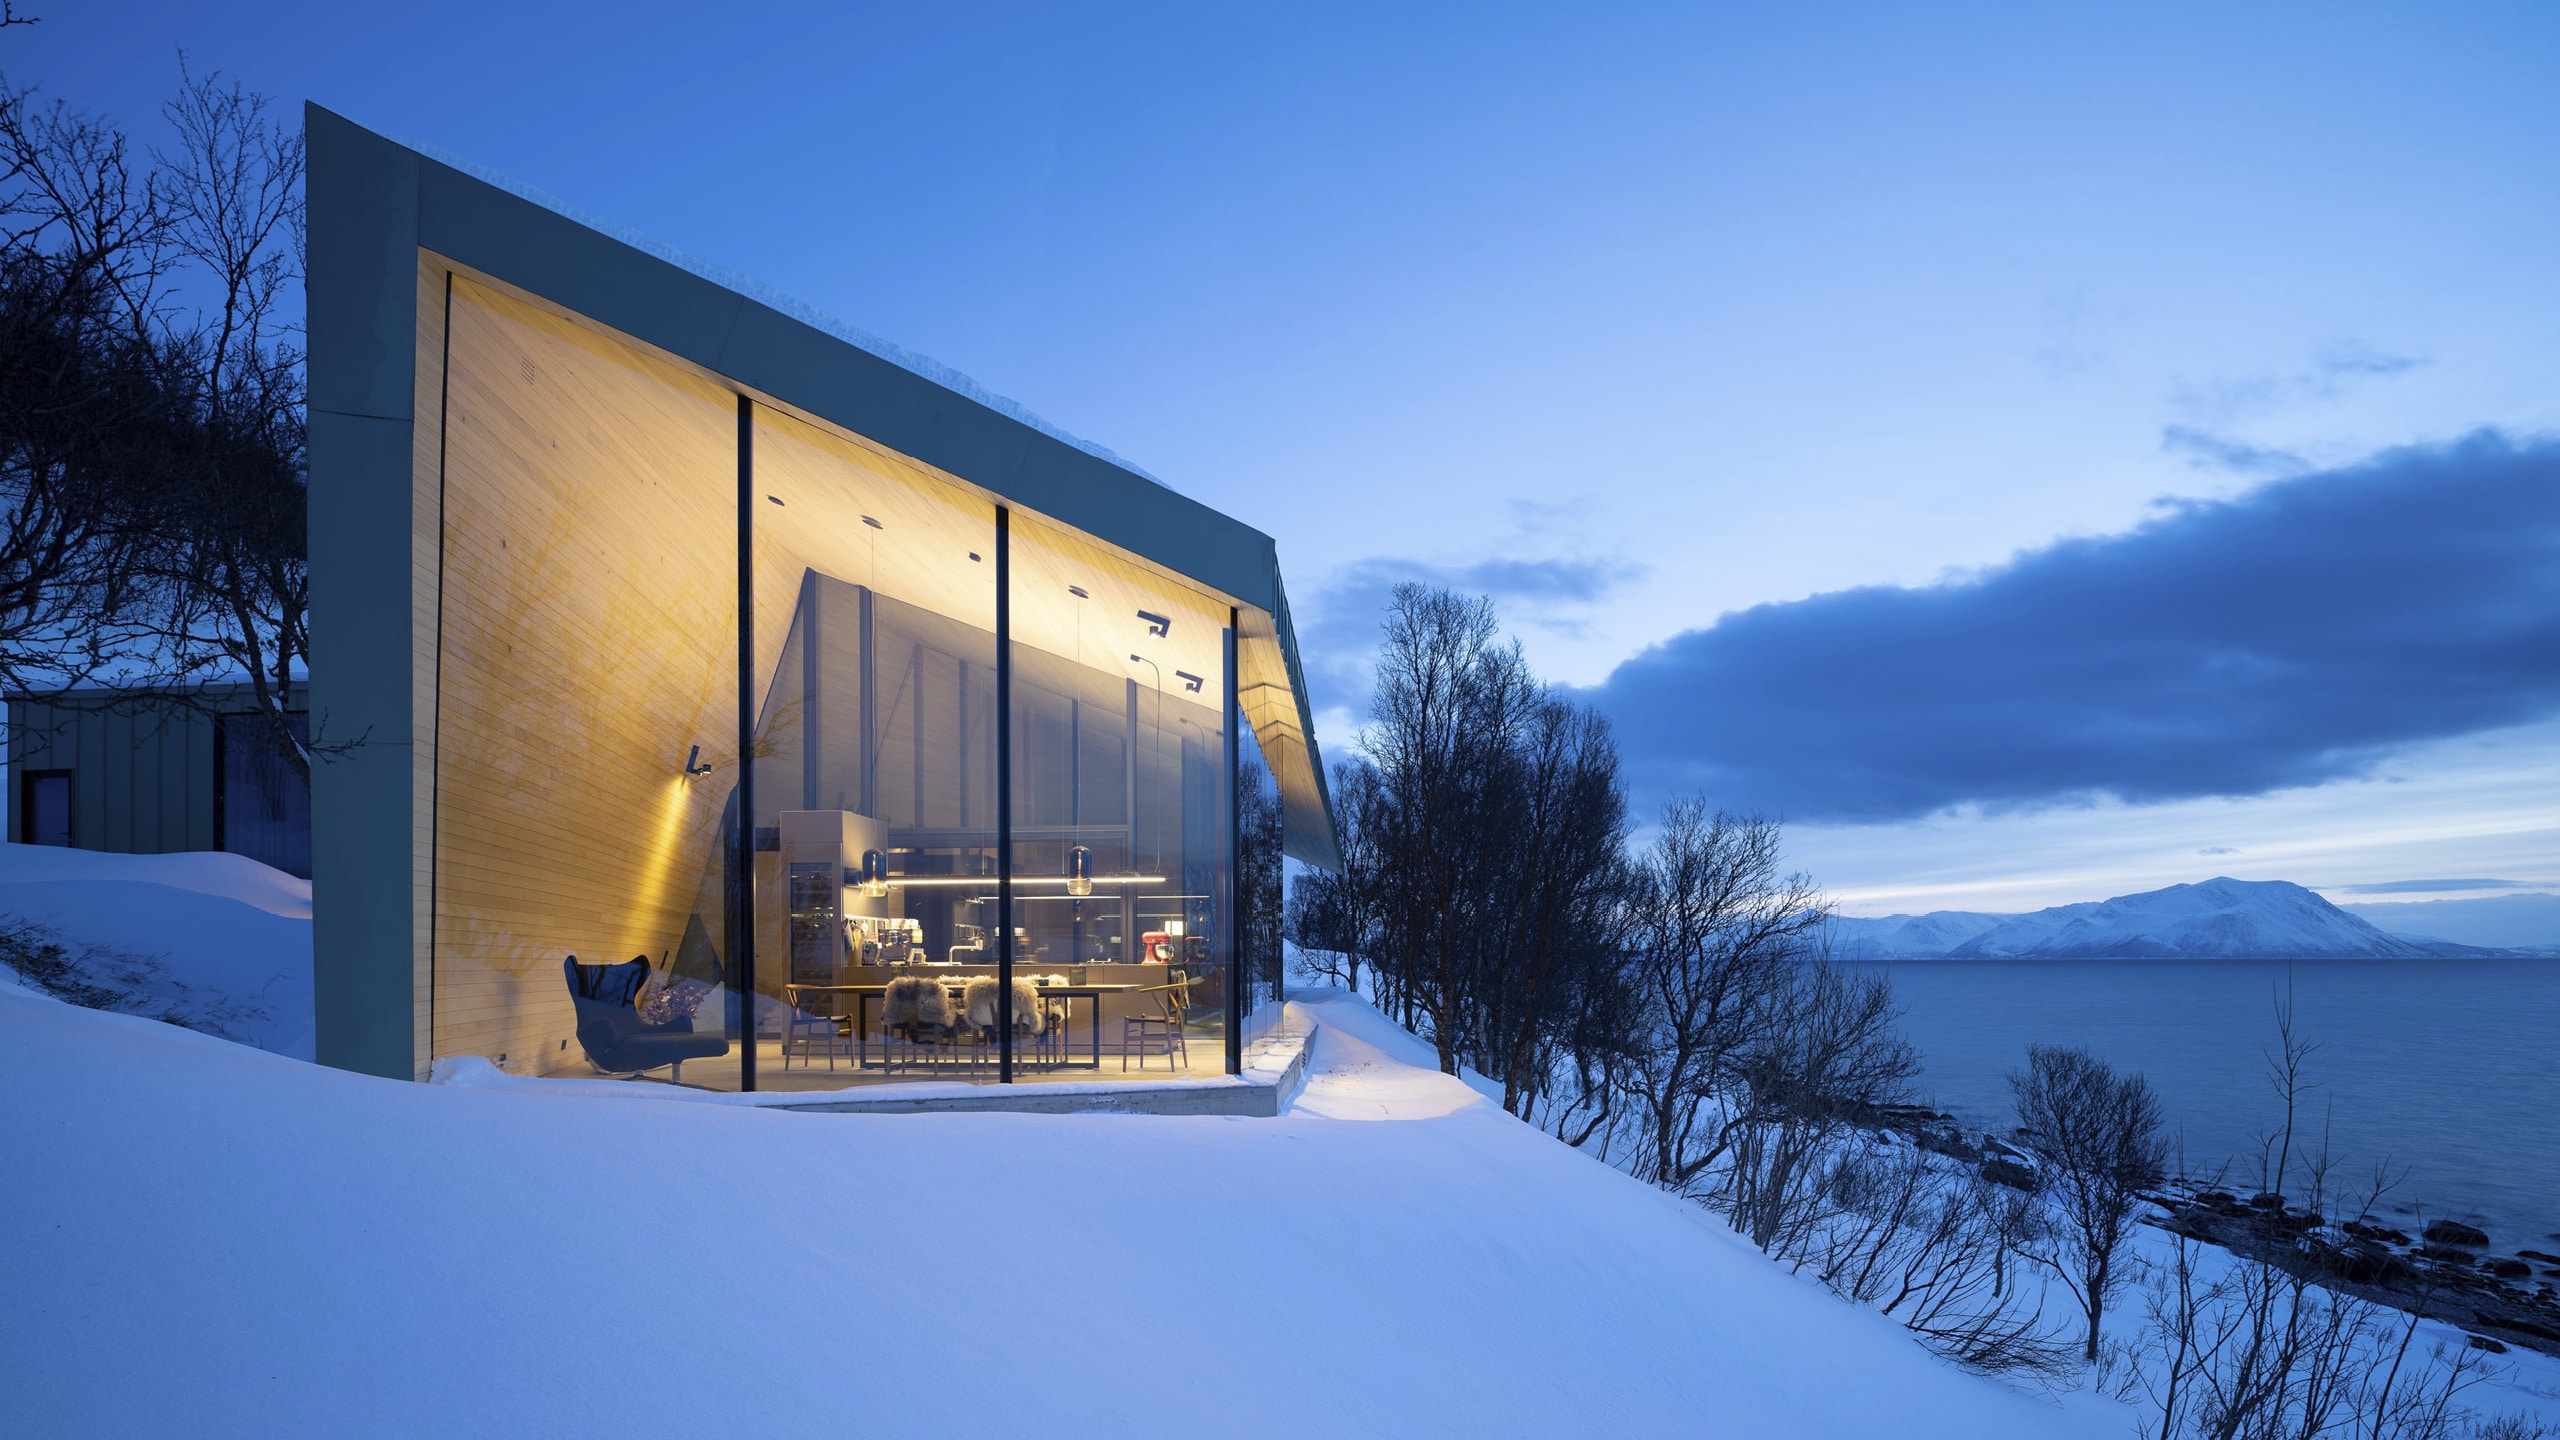 Snorre Stinessen Architecture's new contemporary cottage, built in a stunning seashore location on the Lyngen peninsula, facade made of Nordic Green alloys from Aurubis Finland